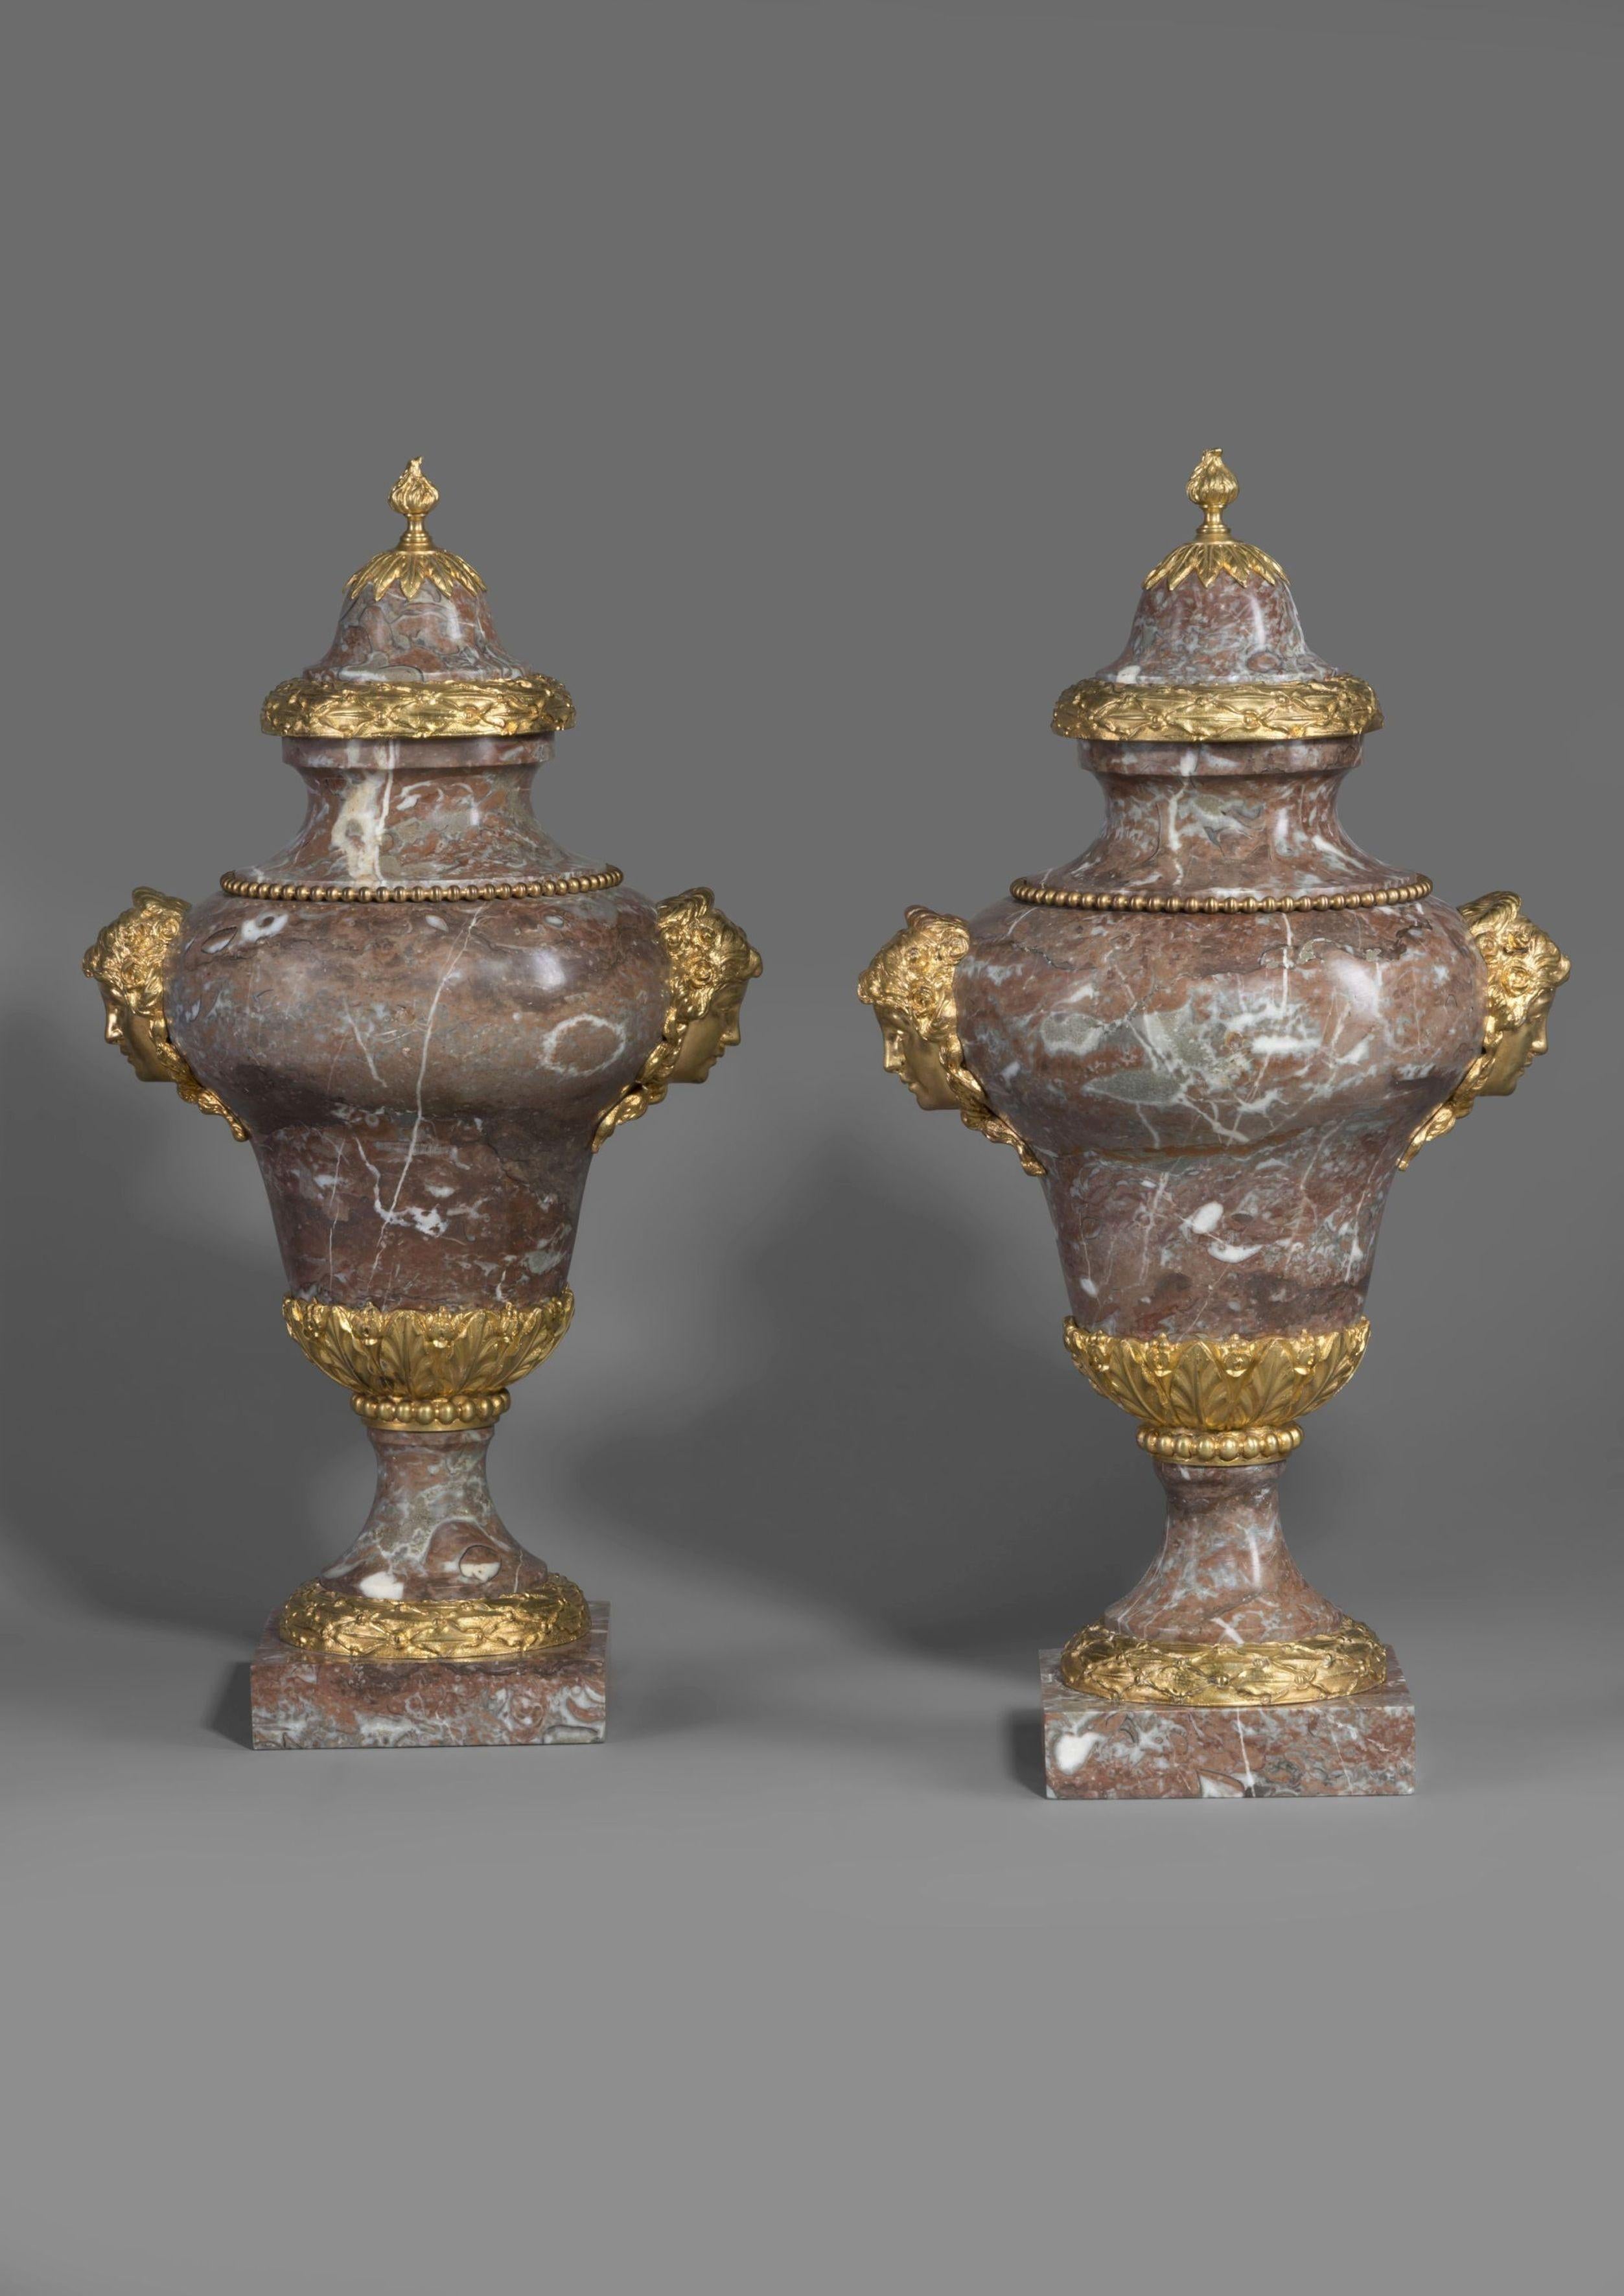 A pair of gilt-bronze mounted Incarnat Turquin marble vases in the manner of Pierre Gouthière.

Each vase is mounted with finely cast gilt bronze female masks and foliate garlands. 

Pierre Gouthière (1732-1813) son of a saddle maker, rose to become